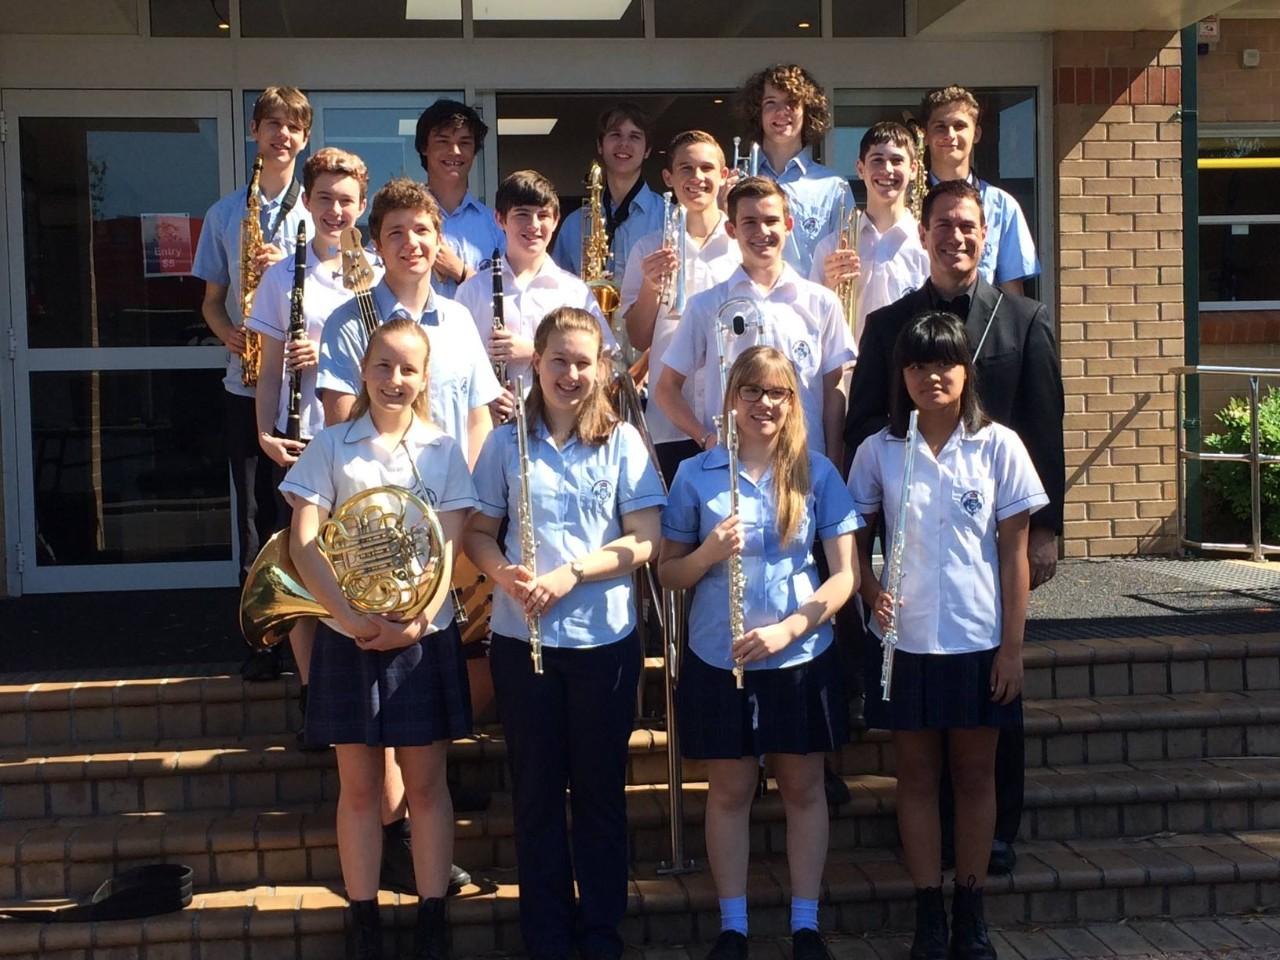 Band students holding their instruments posing for a photo